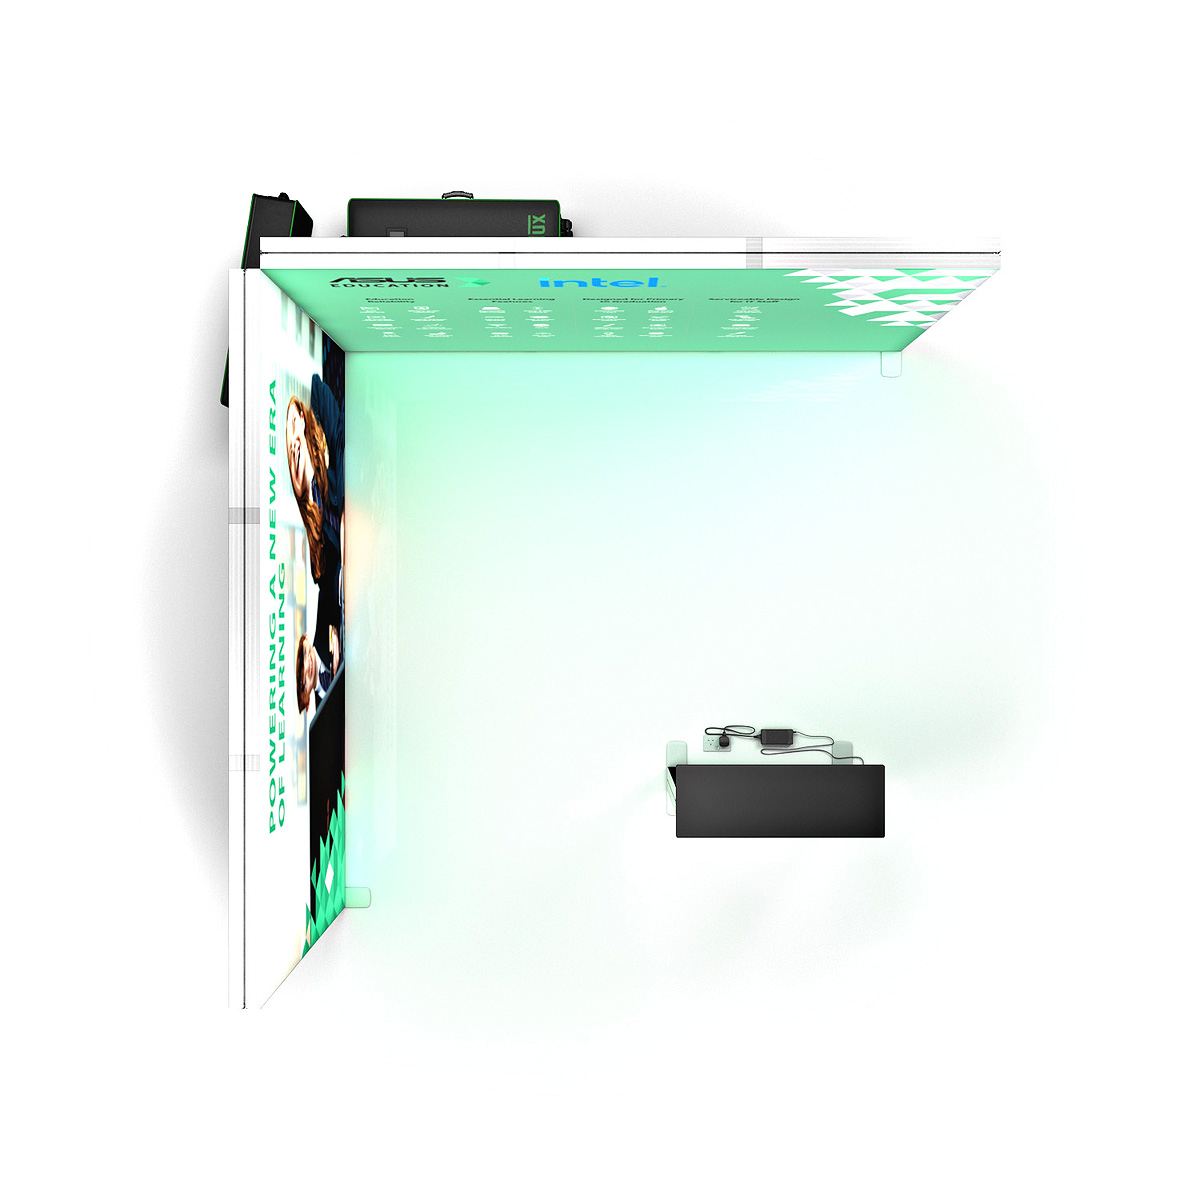 FABRILUX® 3x3 LED Lightbox Fabric Exhibition Stand Display L-Shaped Corner Booth Overhead Plan View Kit 12